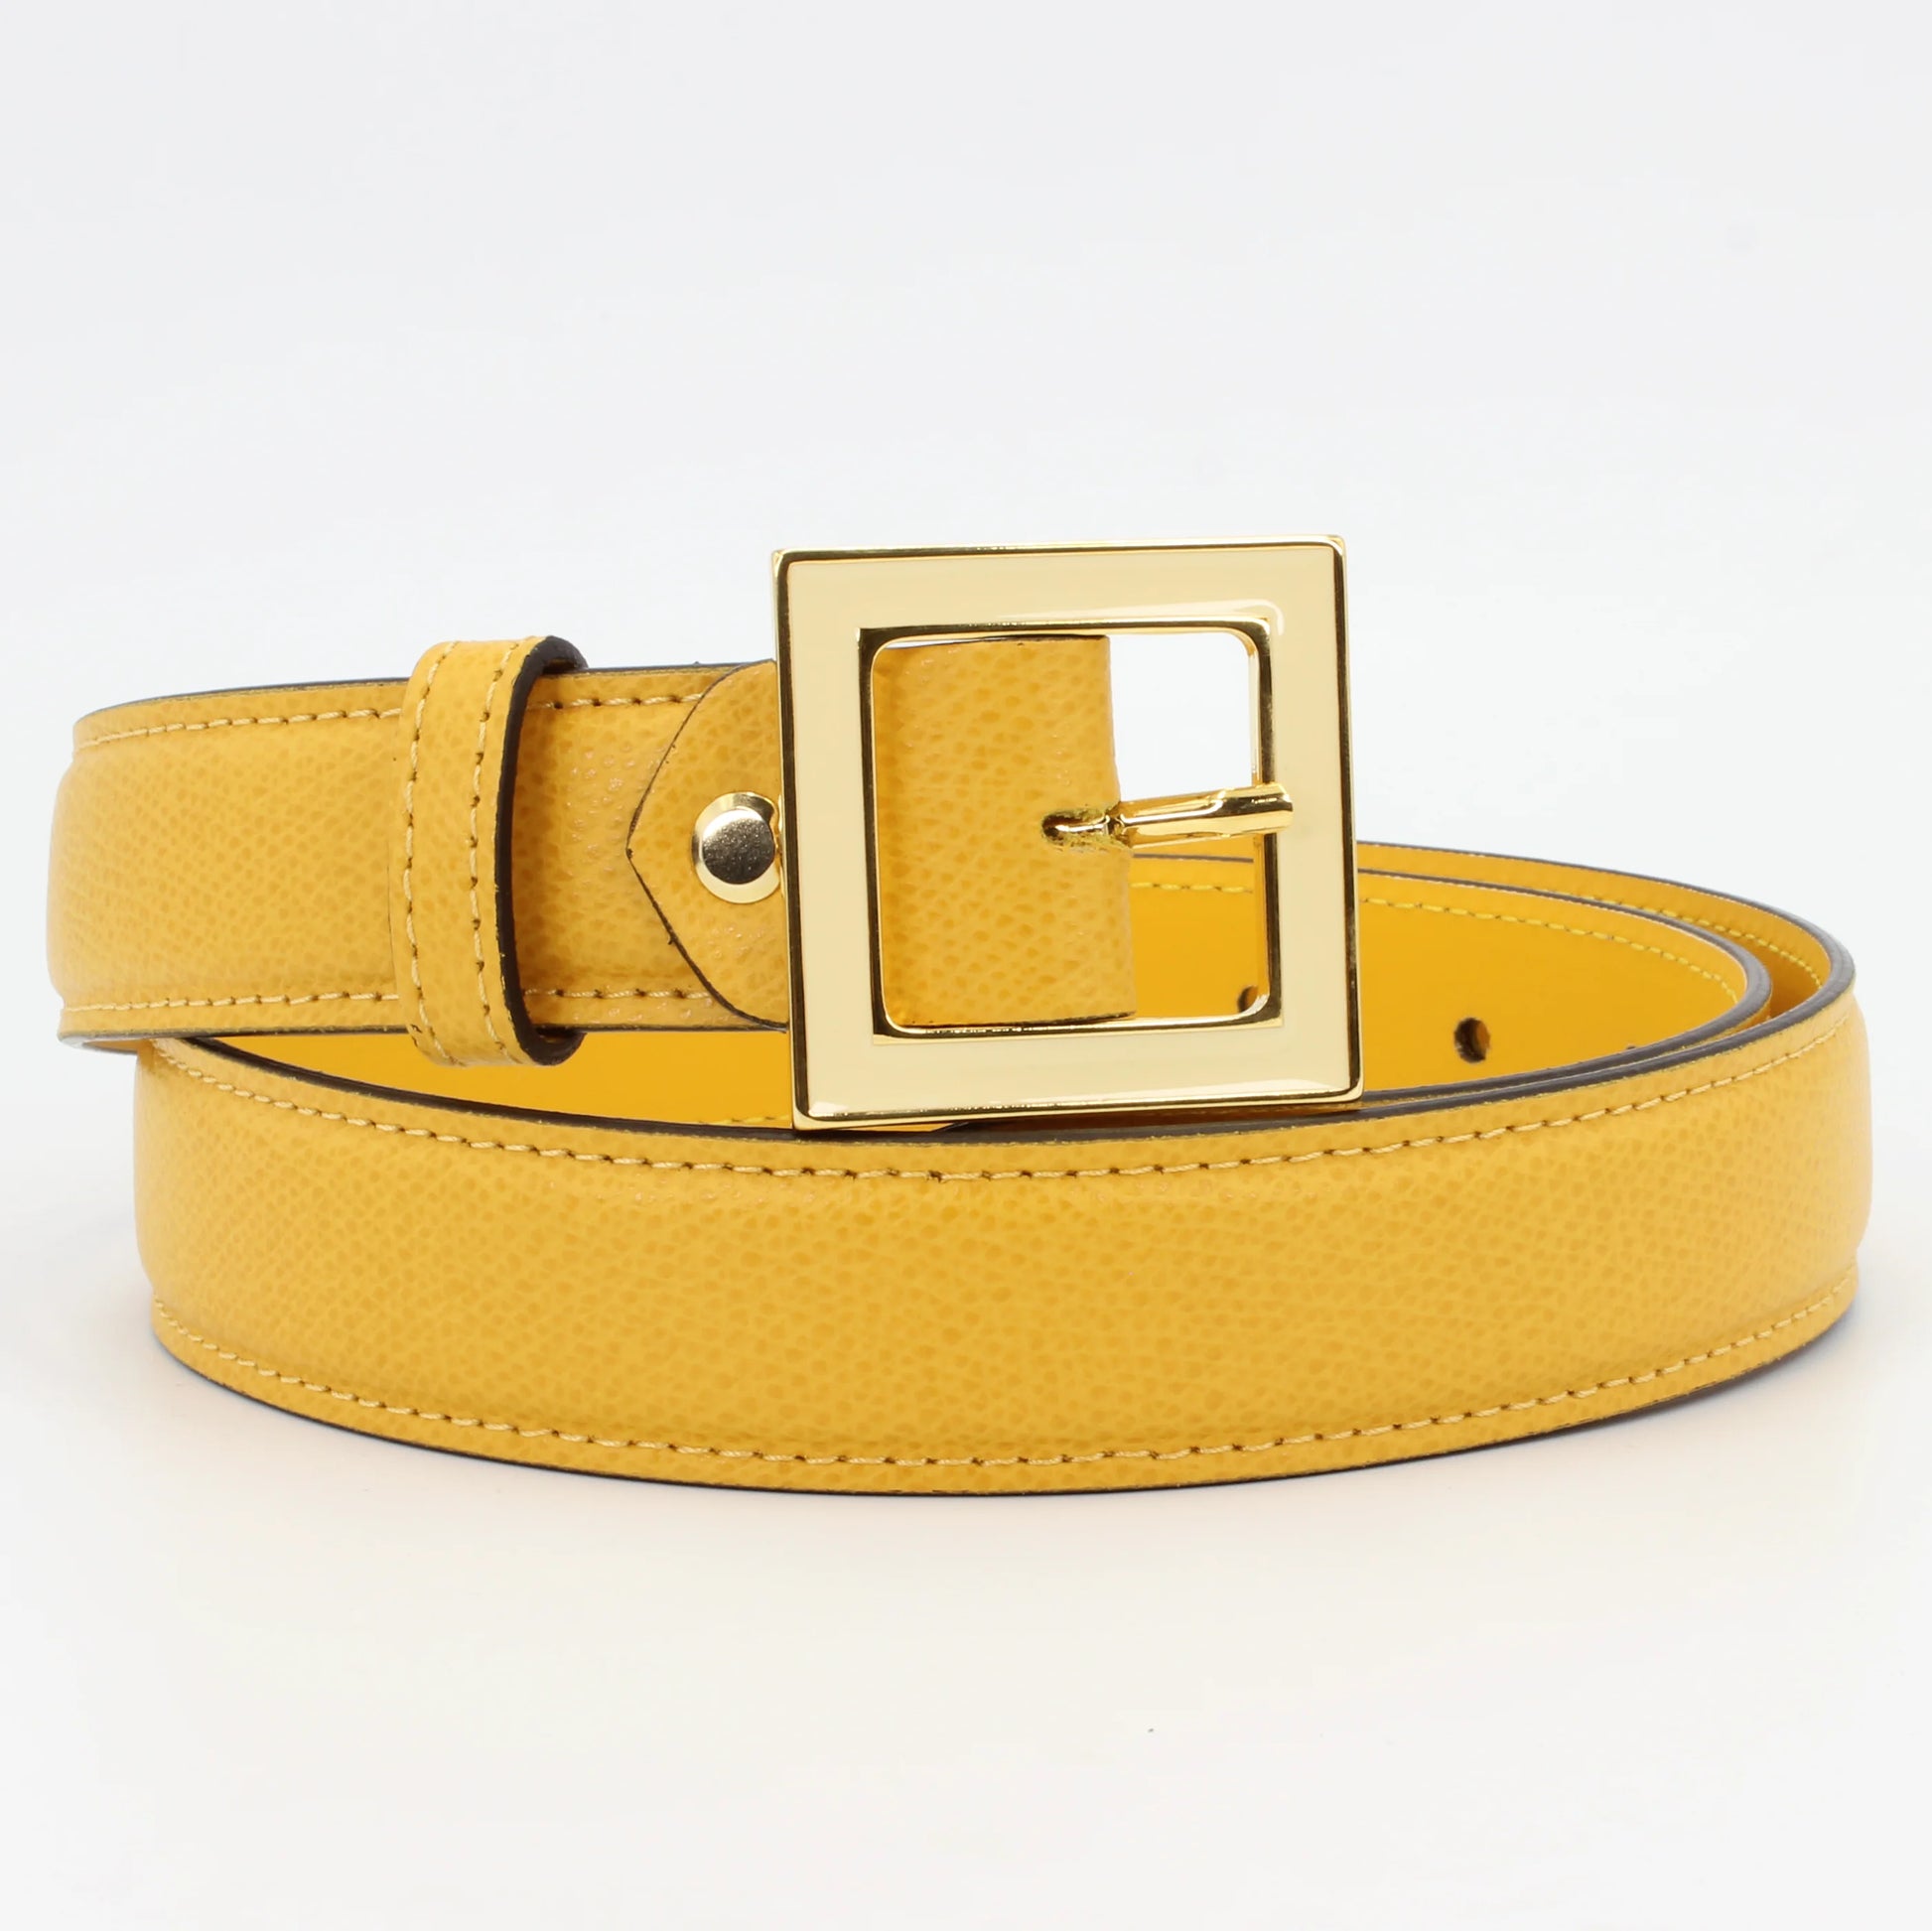 Shop our Italian-made Cuoieria Fiorentina leather belt in giallo (CIO500942D420) or browse our range of Italian belts for men & women in-store at Aliverti Cape Town, or shop online.   We deliver in South Africa & offer multiple payment plans as well as accept multiple safe & secure payment methods.